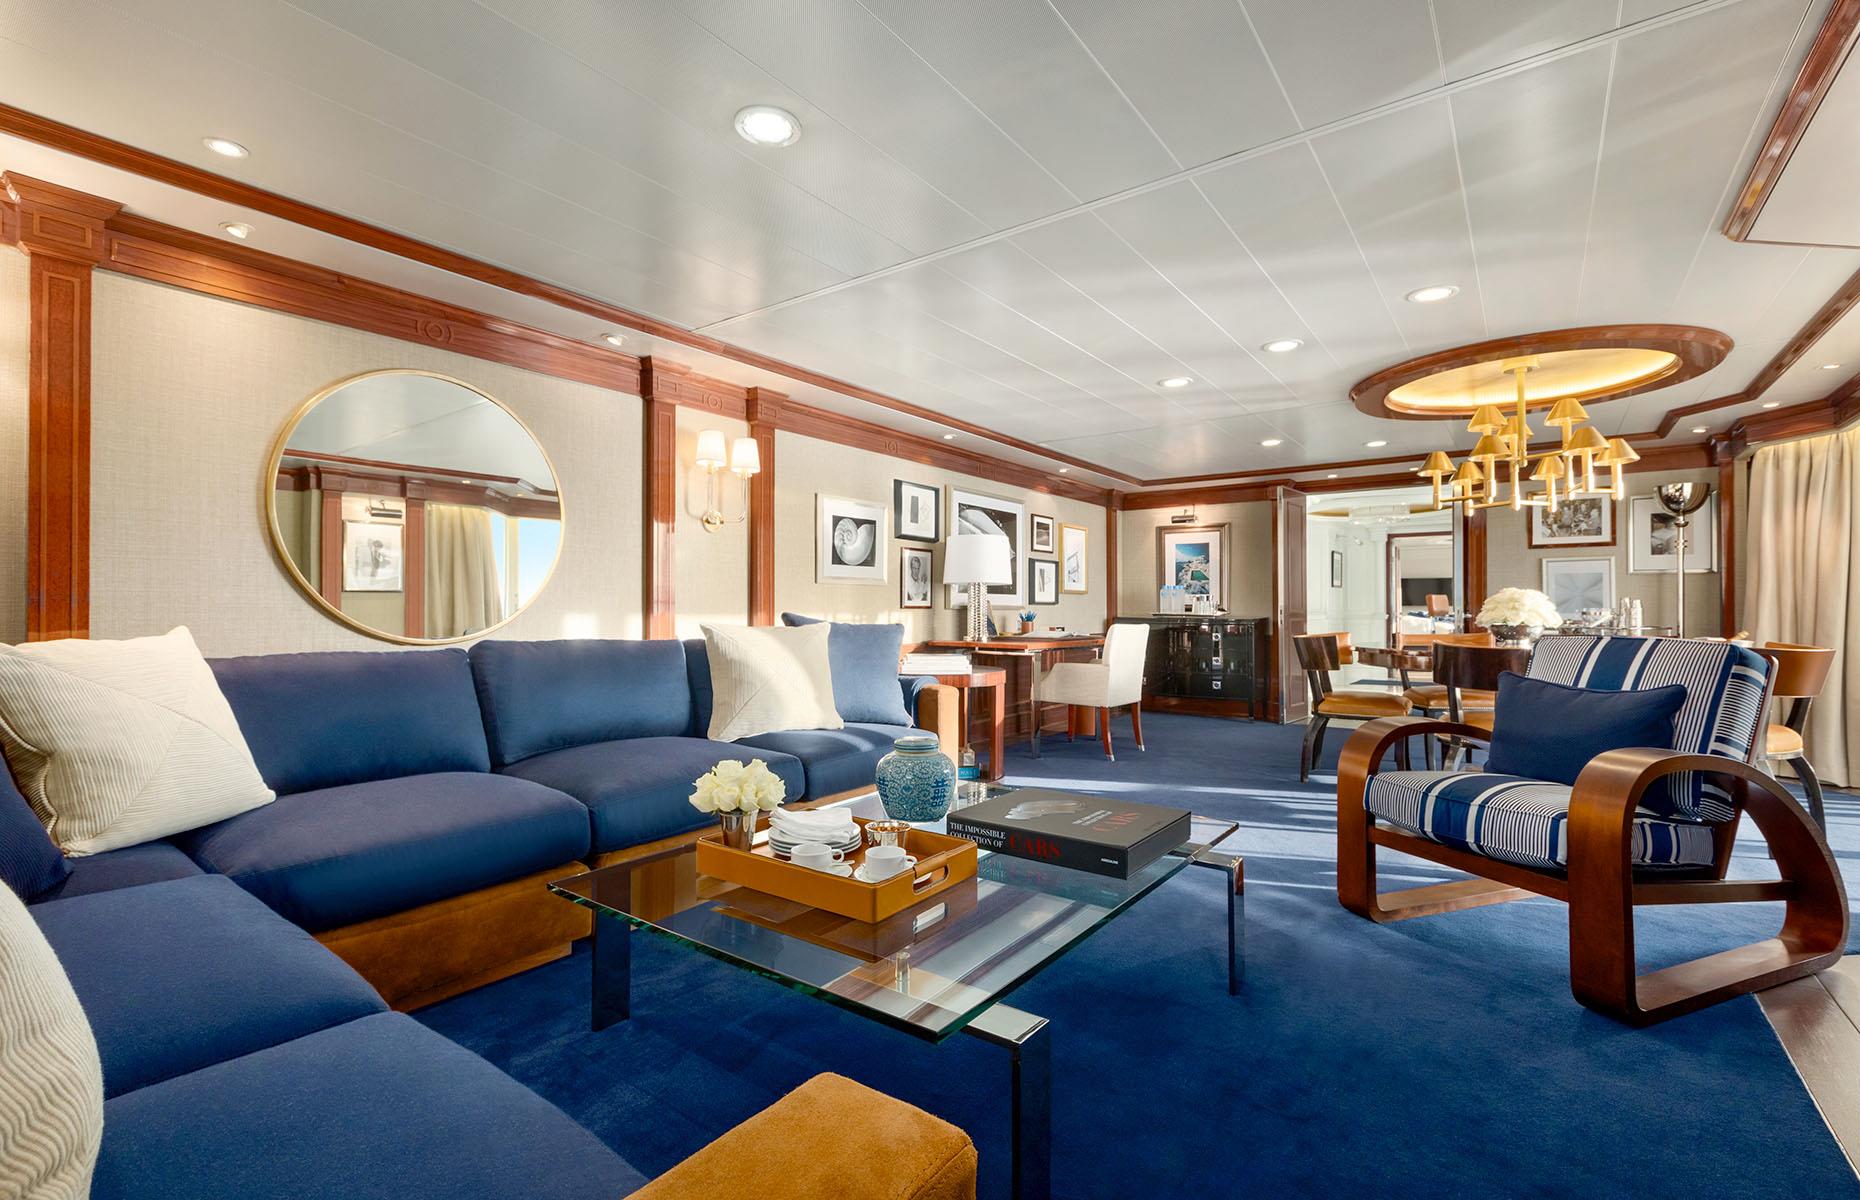 Collaborations between cruise lines and famous names in the world of food and entertainment are common, and now some of the world’s top designers are getting in on the act. Ralph Lauren has teamed up with Oceania Cruises to ramp up the wow factor of the Owner’s Suites on Vista, which launched in May 2023. Expect the design house’s furnishings in the living rooms, dining rooms and bedrooms.